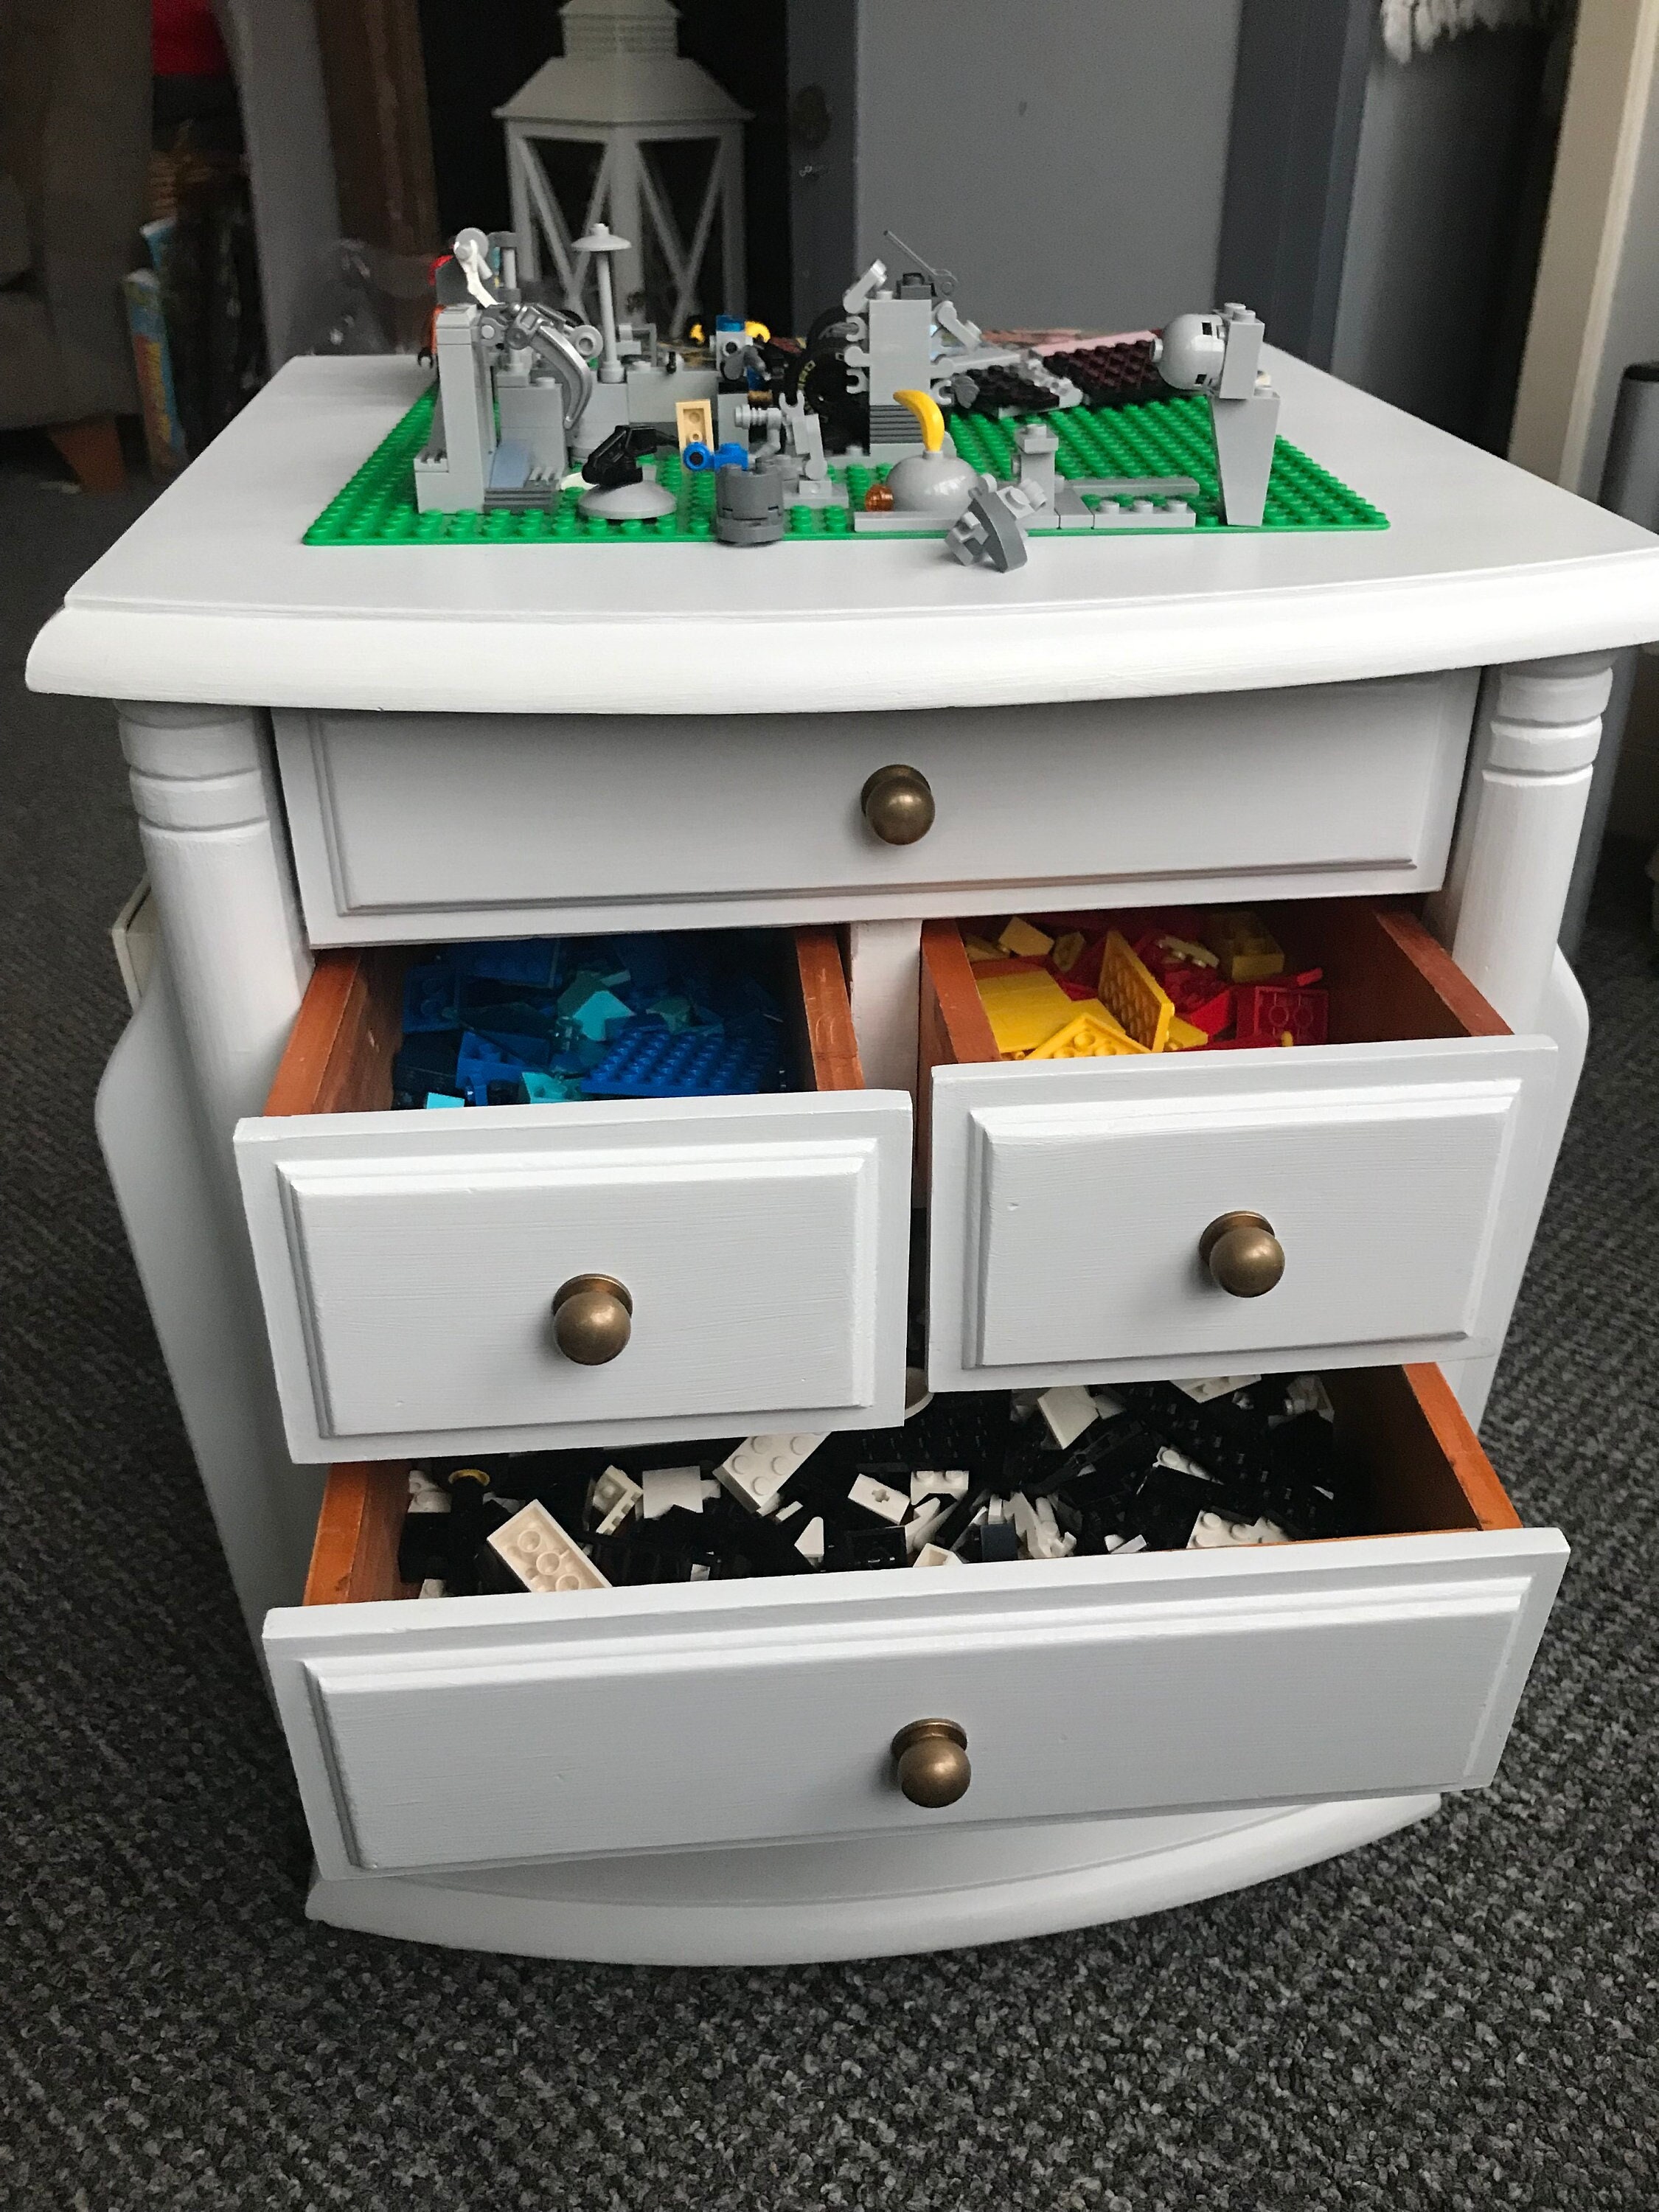 Lego Storage Box, Lego Drawers, Lego Parts Box, 3D Printed With Lego Trays,  3 Sizes, Any Colour, Can Have Name Added, Amazing Storage Box 